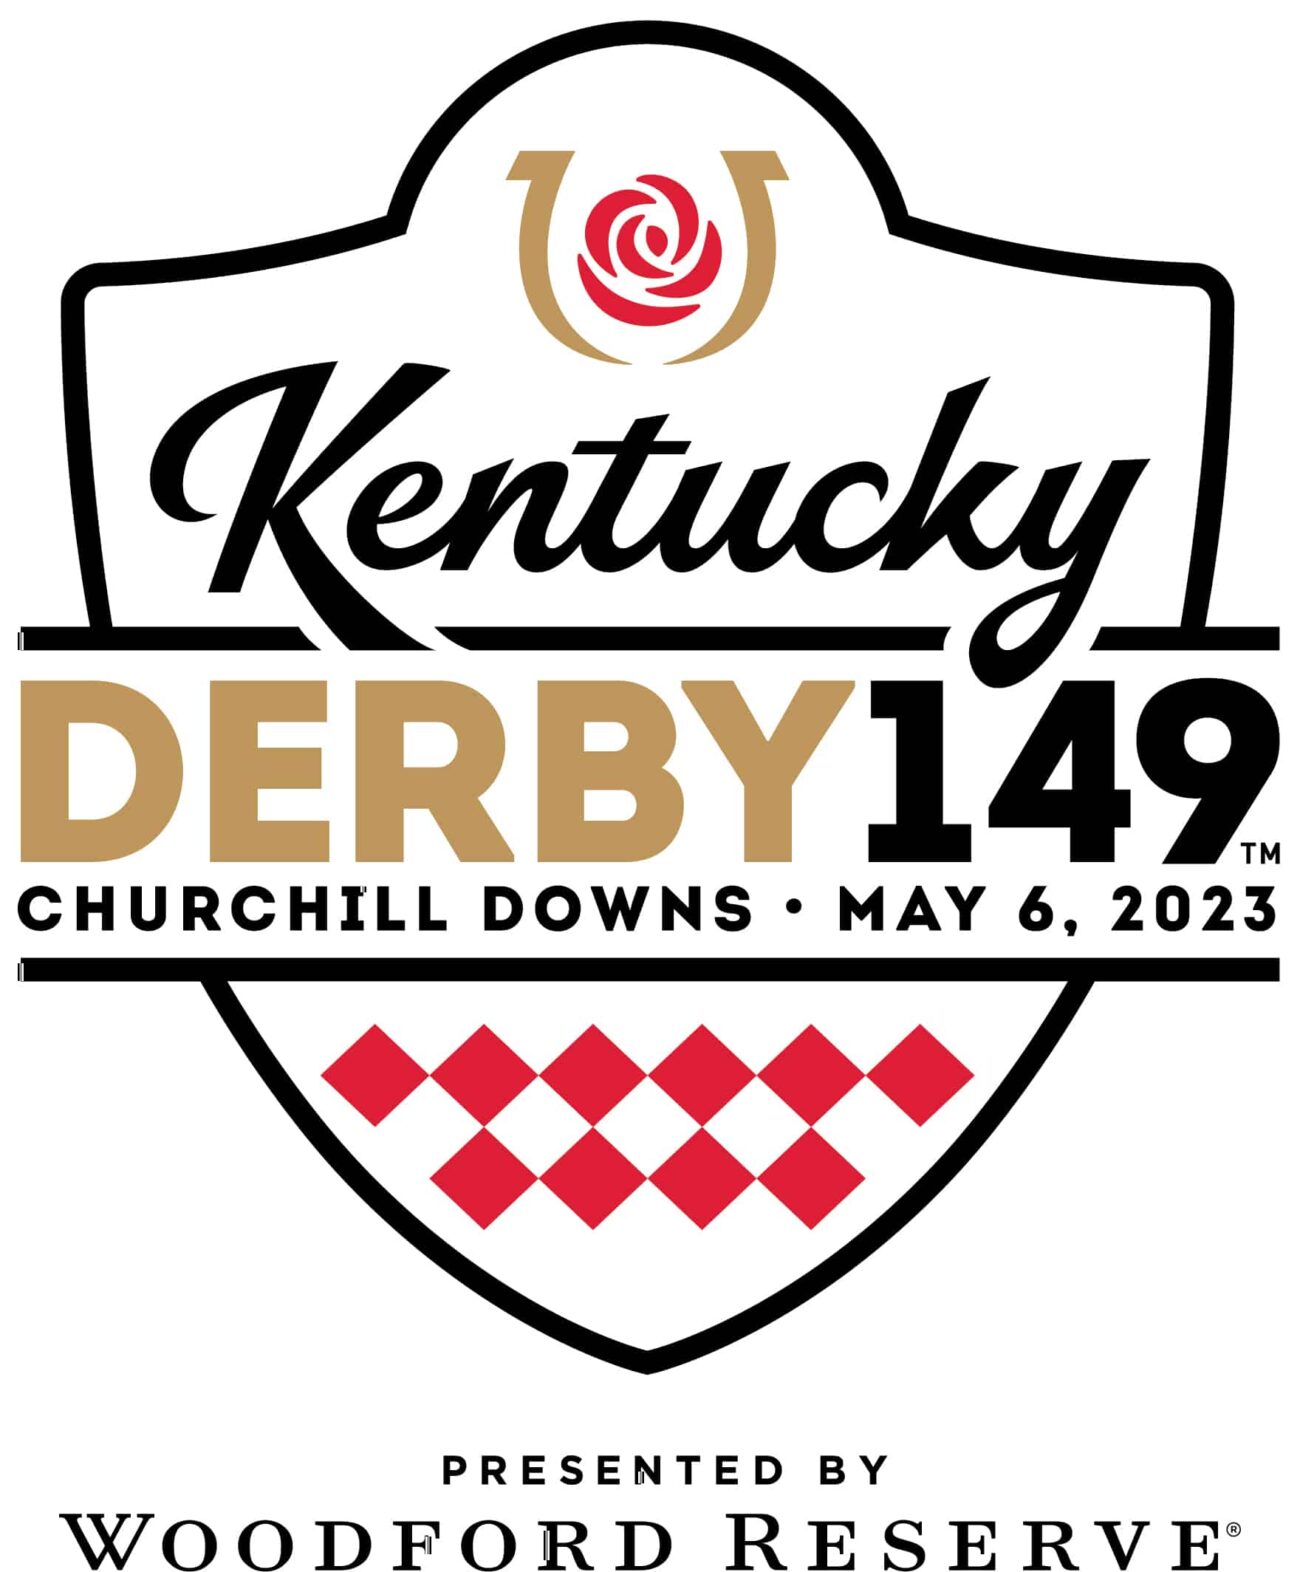 What Time Does the Kentucky Derby Start 2023?